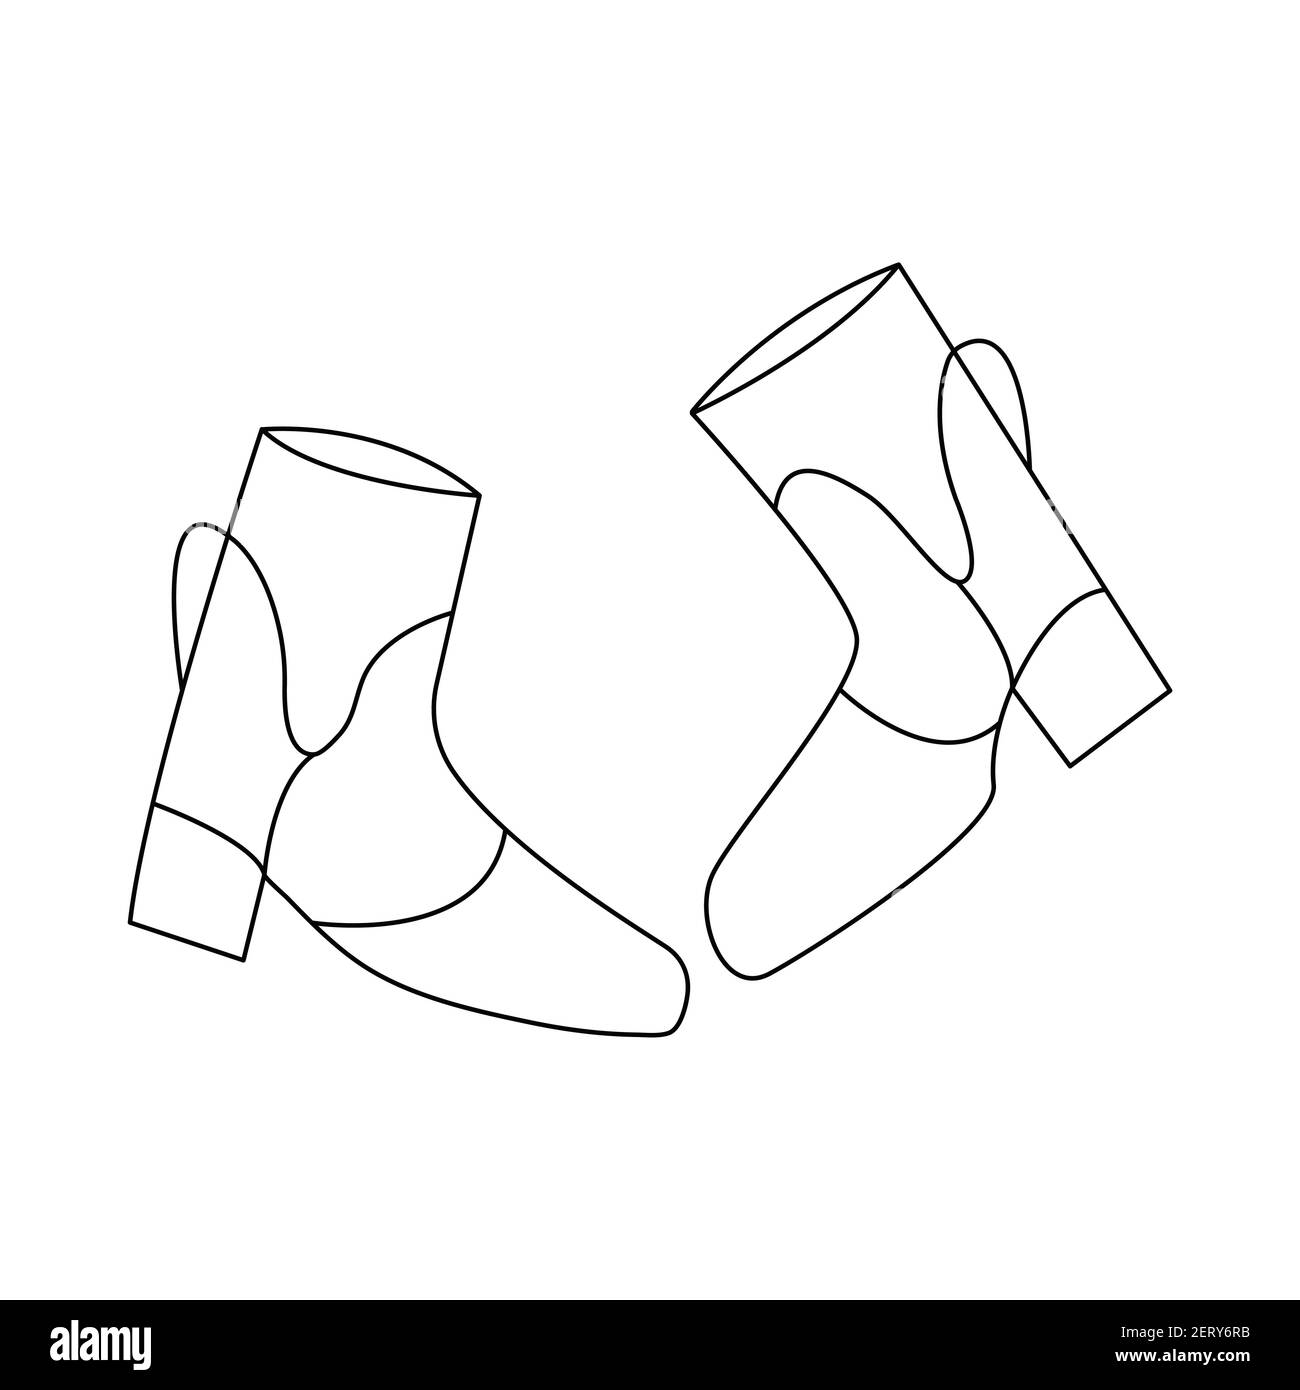 Womens stylish boots with wide heels with a buckle. Comfortable shoes, wardrobe item. Black and white vector isolated illustration in doodle style Stock Vector